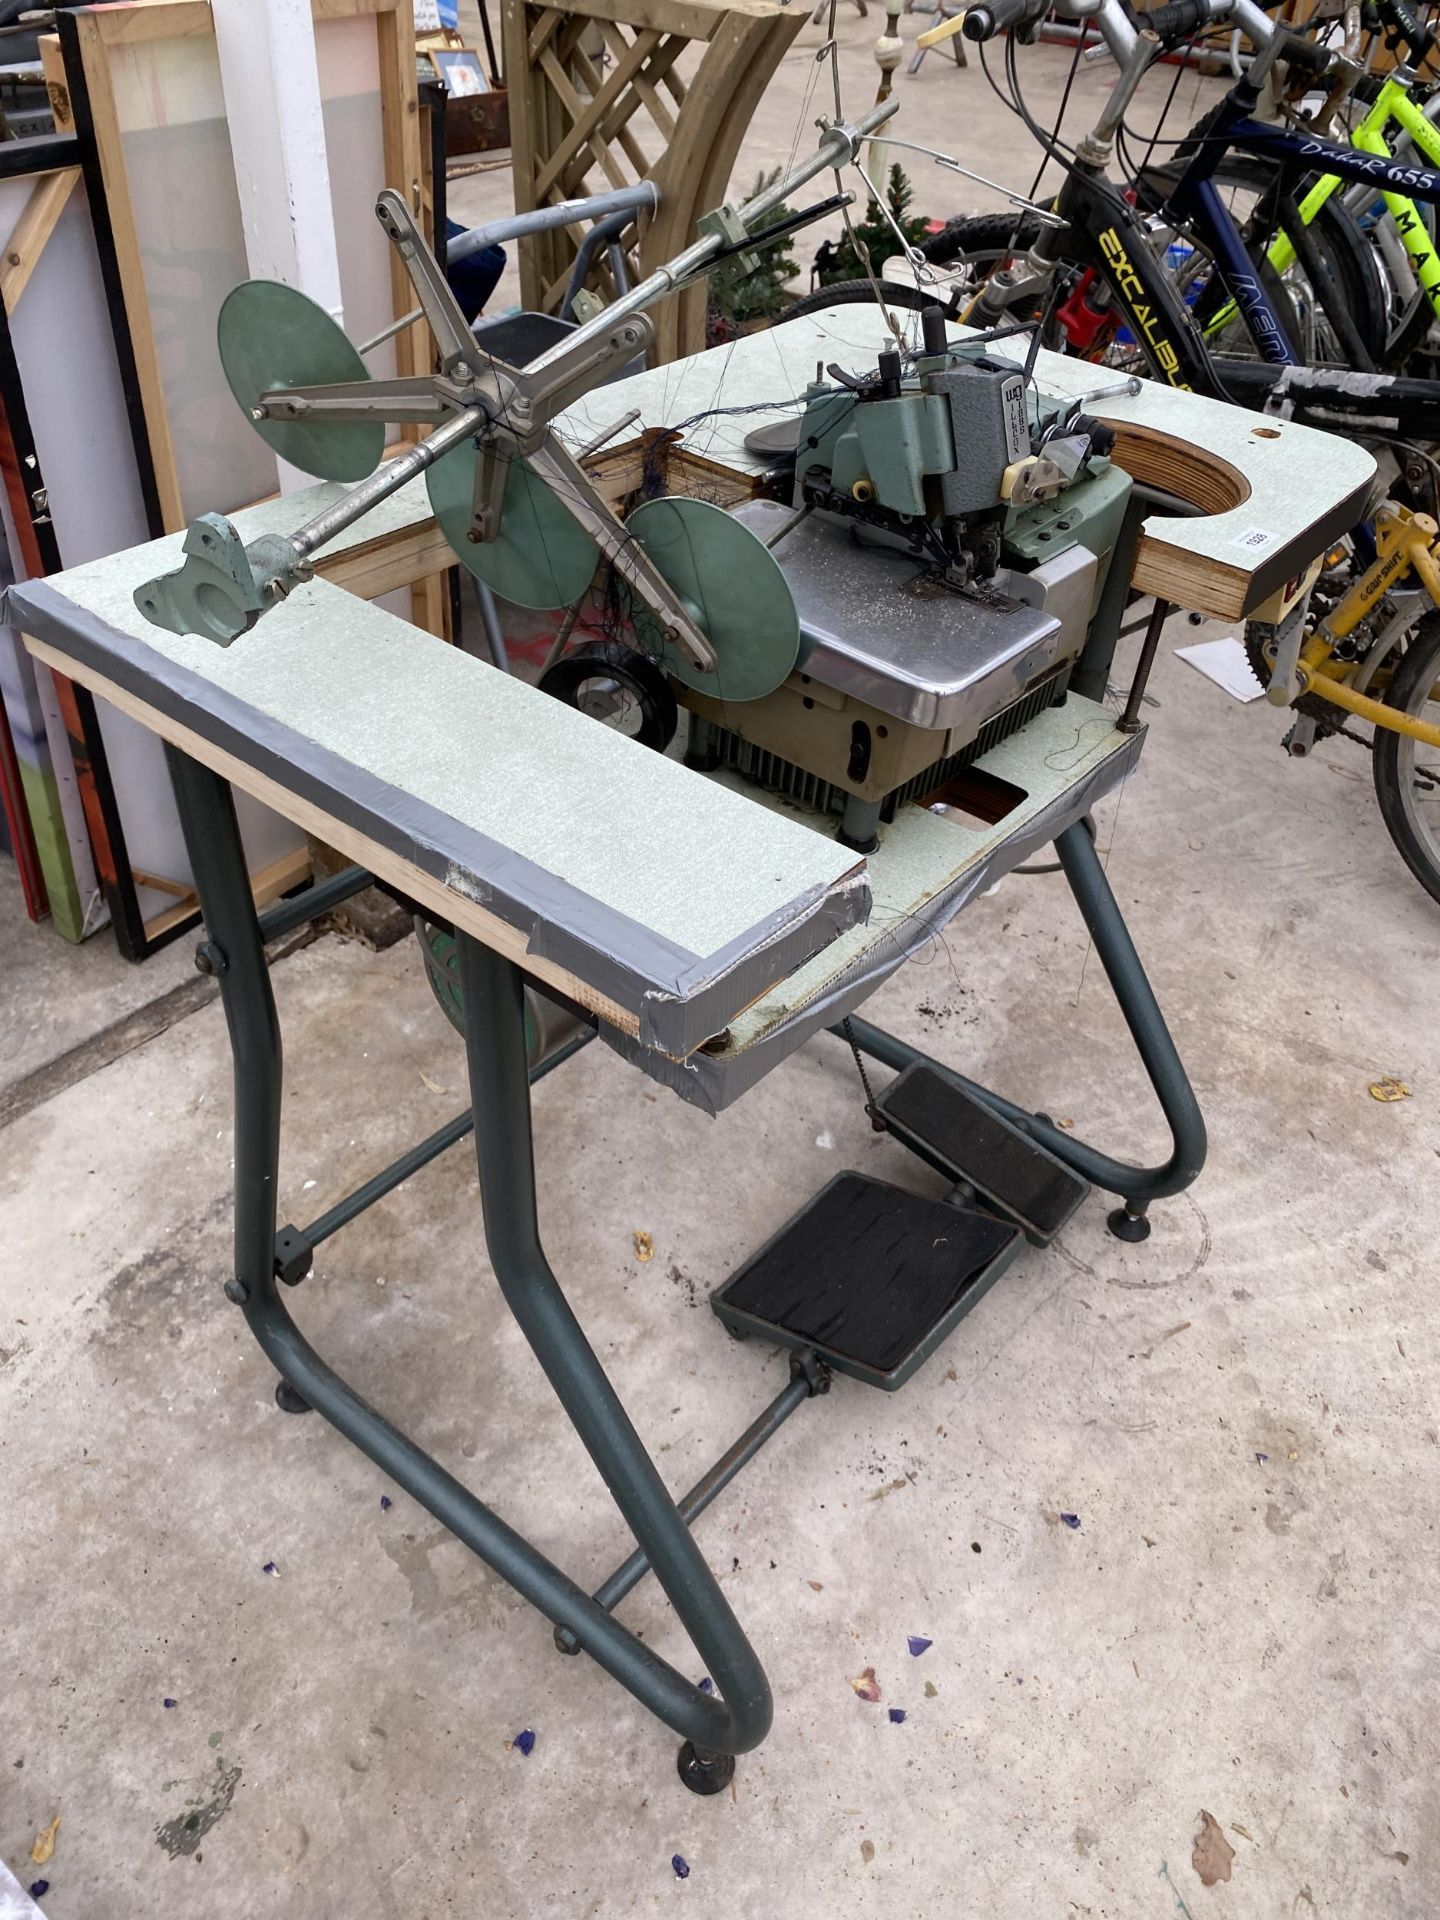 A WILLCOX AND GIBBS INDUSTRIAL SEWING MACHINE WITH TREADLE BASE - Image 2 of 6